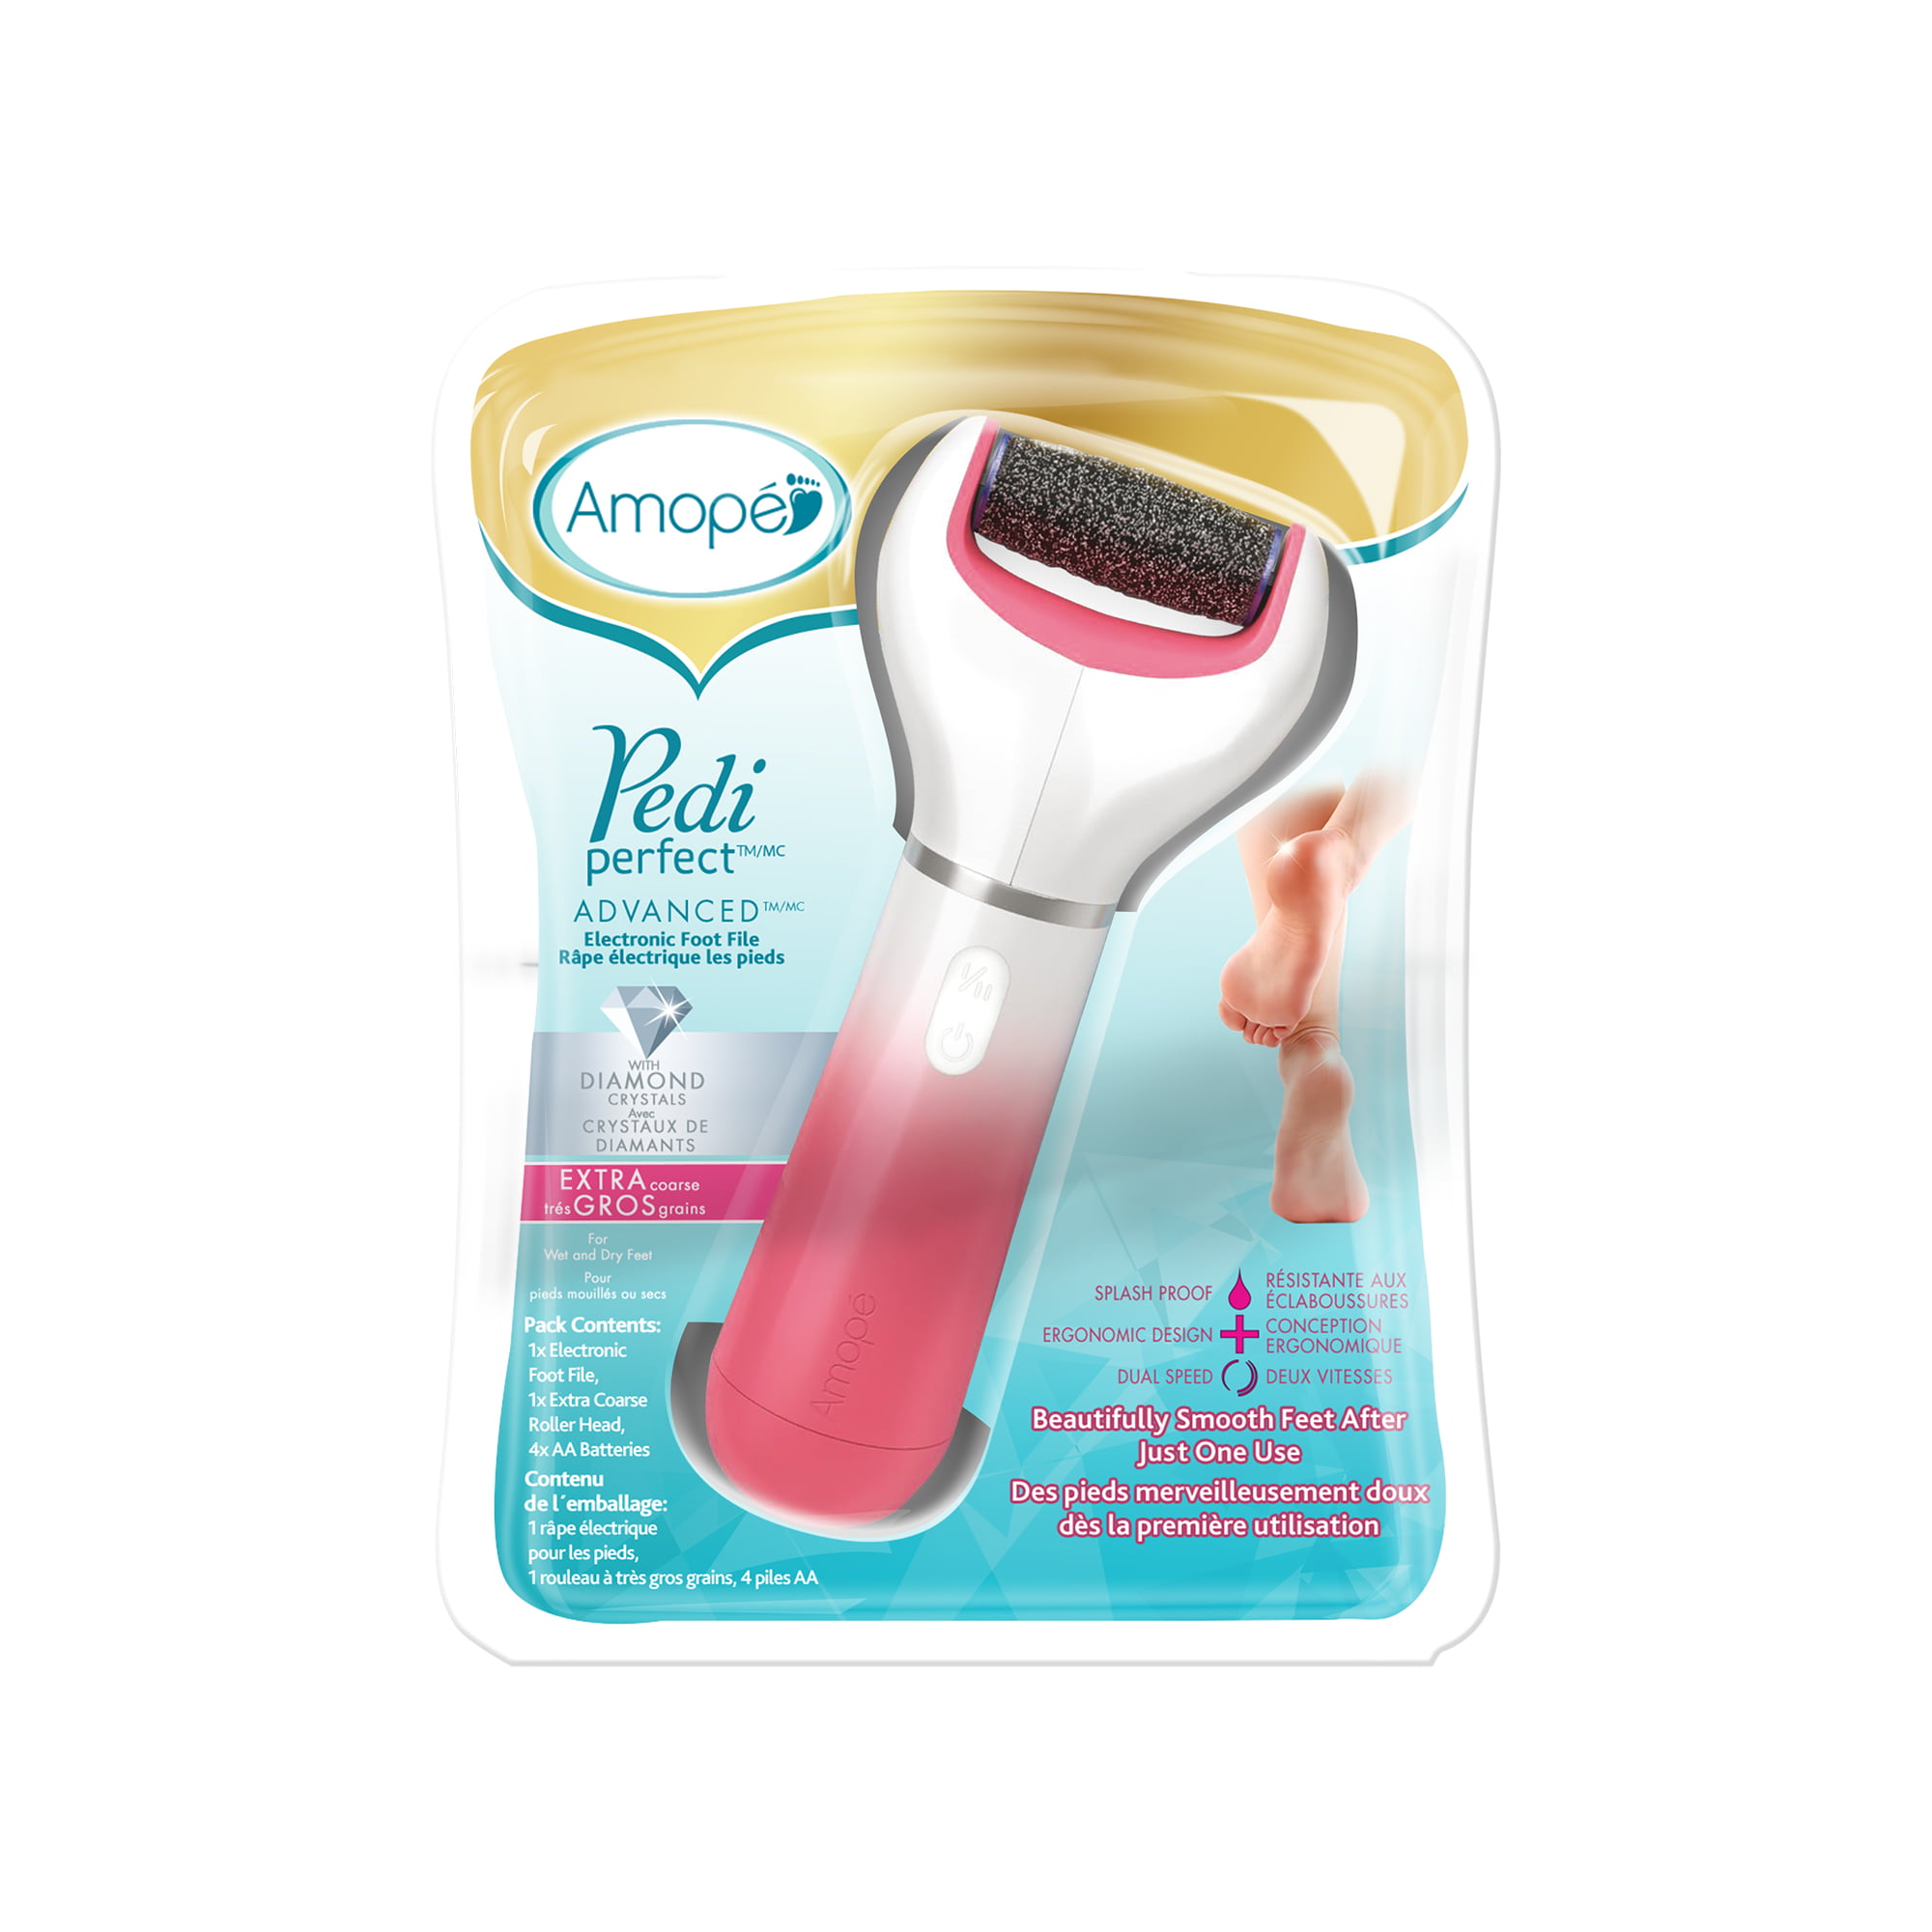 pedi foot smoother